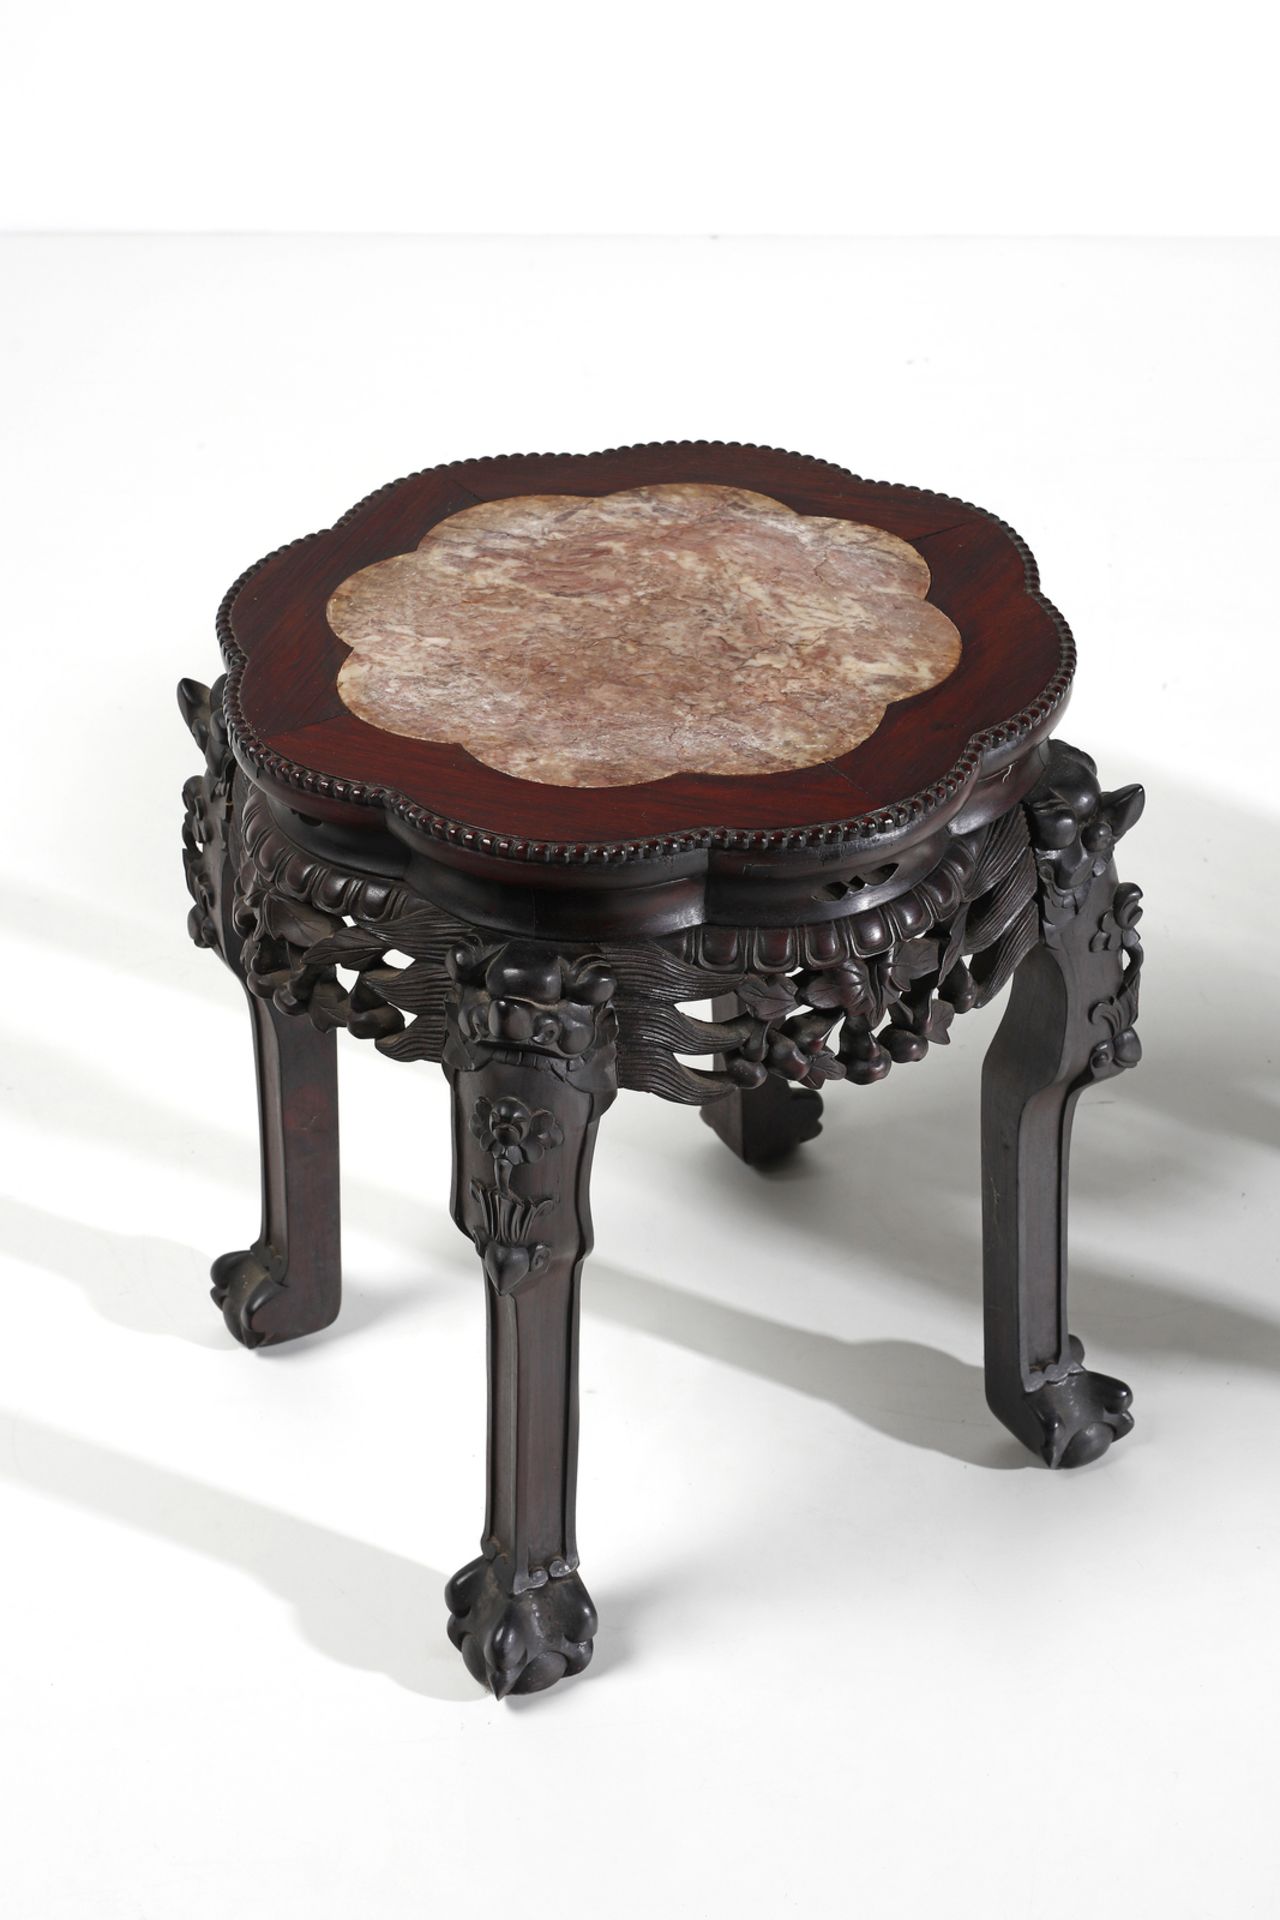 Arte Cinese A pair of wooden stools with pink marble top China, Qing dynasty, 19th century . - Image 2 of 7